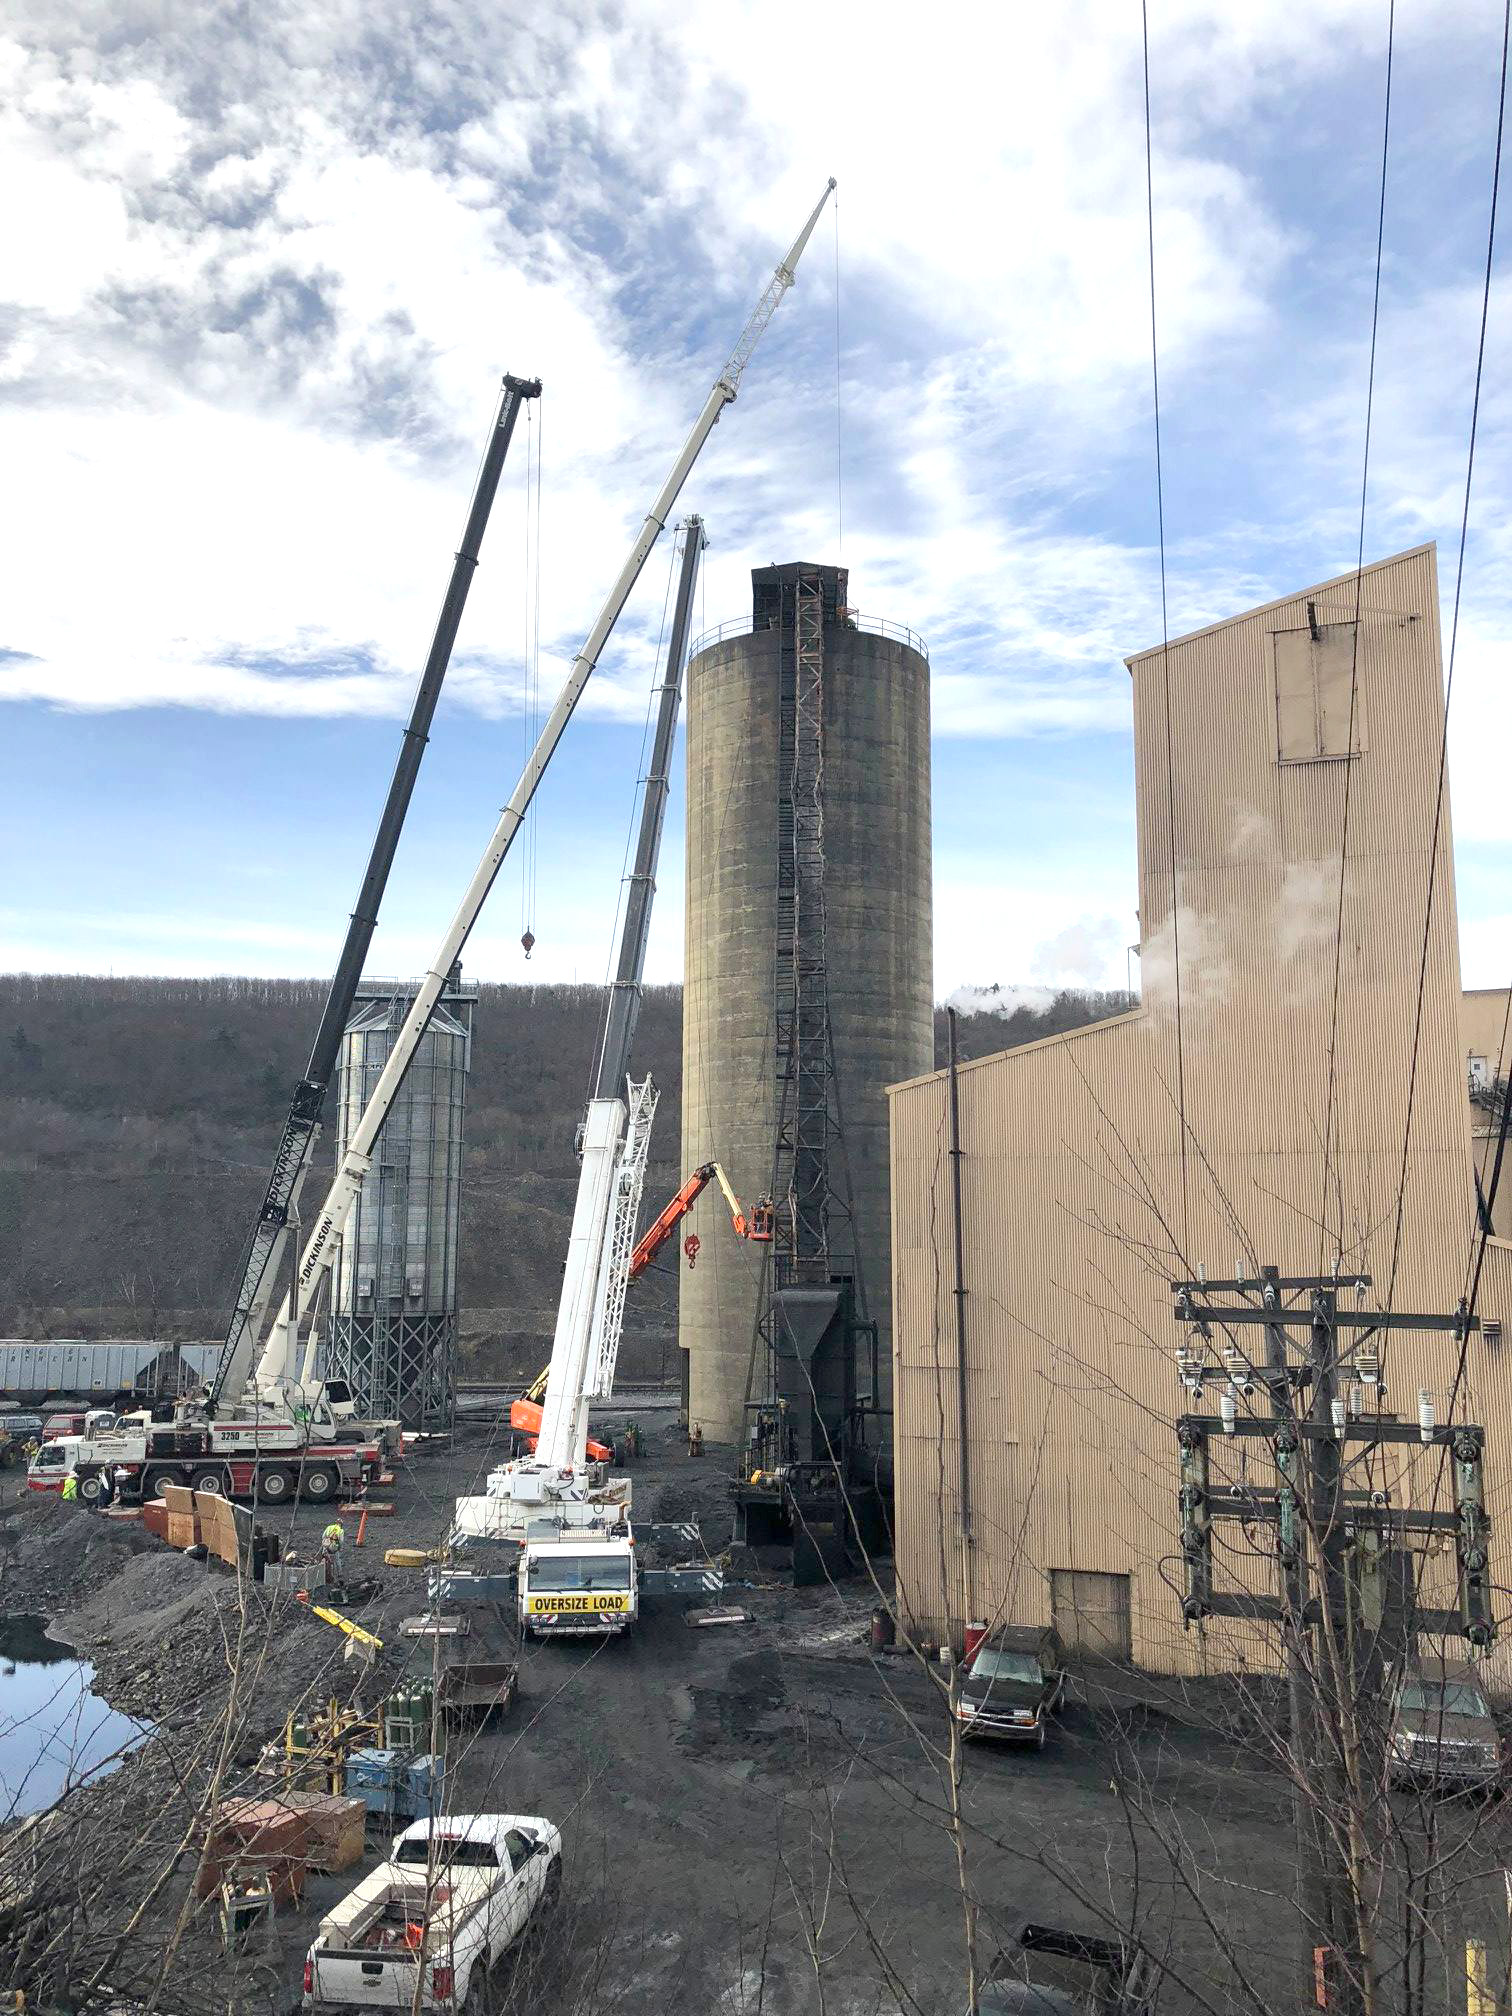 Photo of cranes working at a power plant